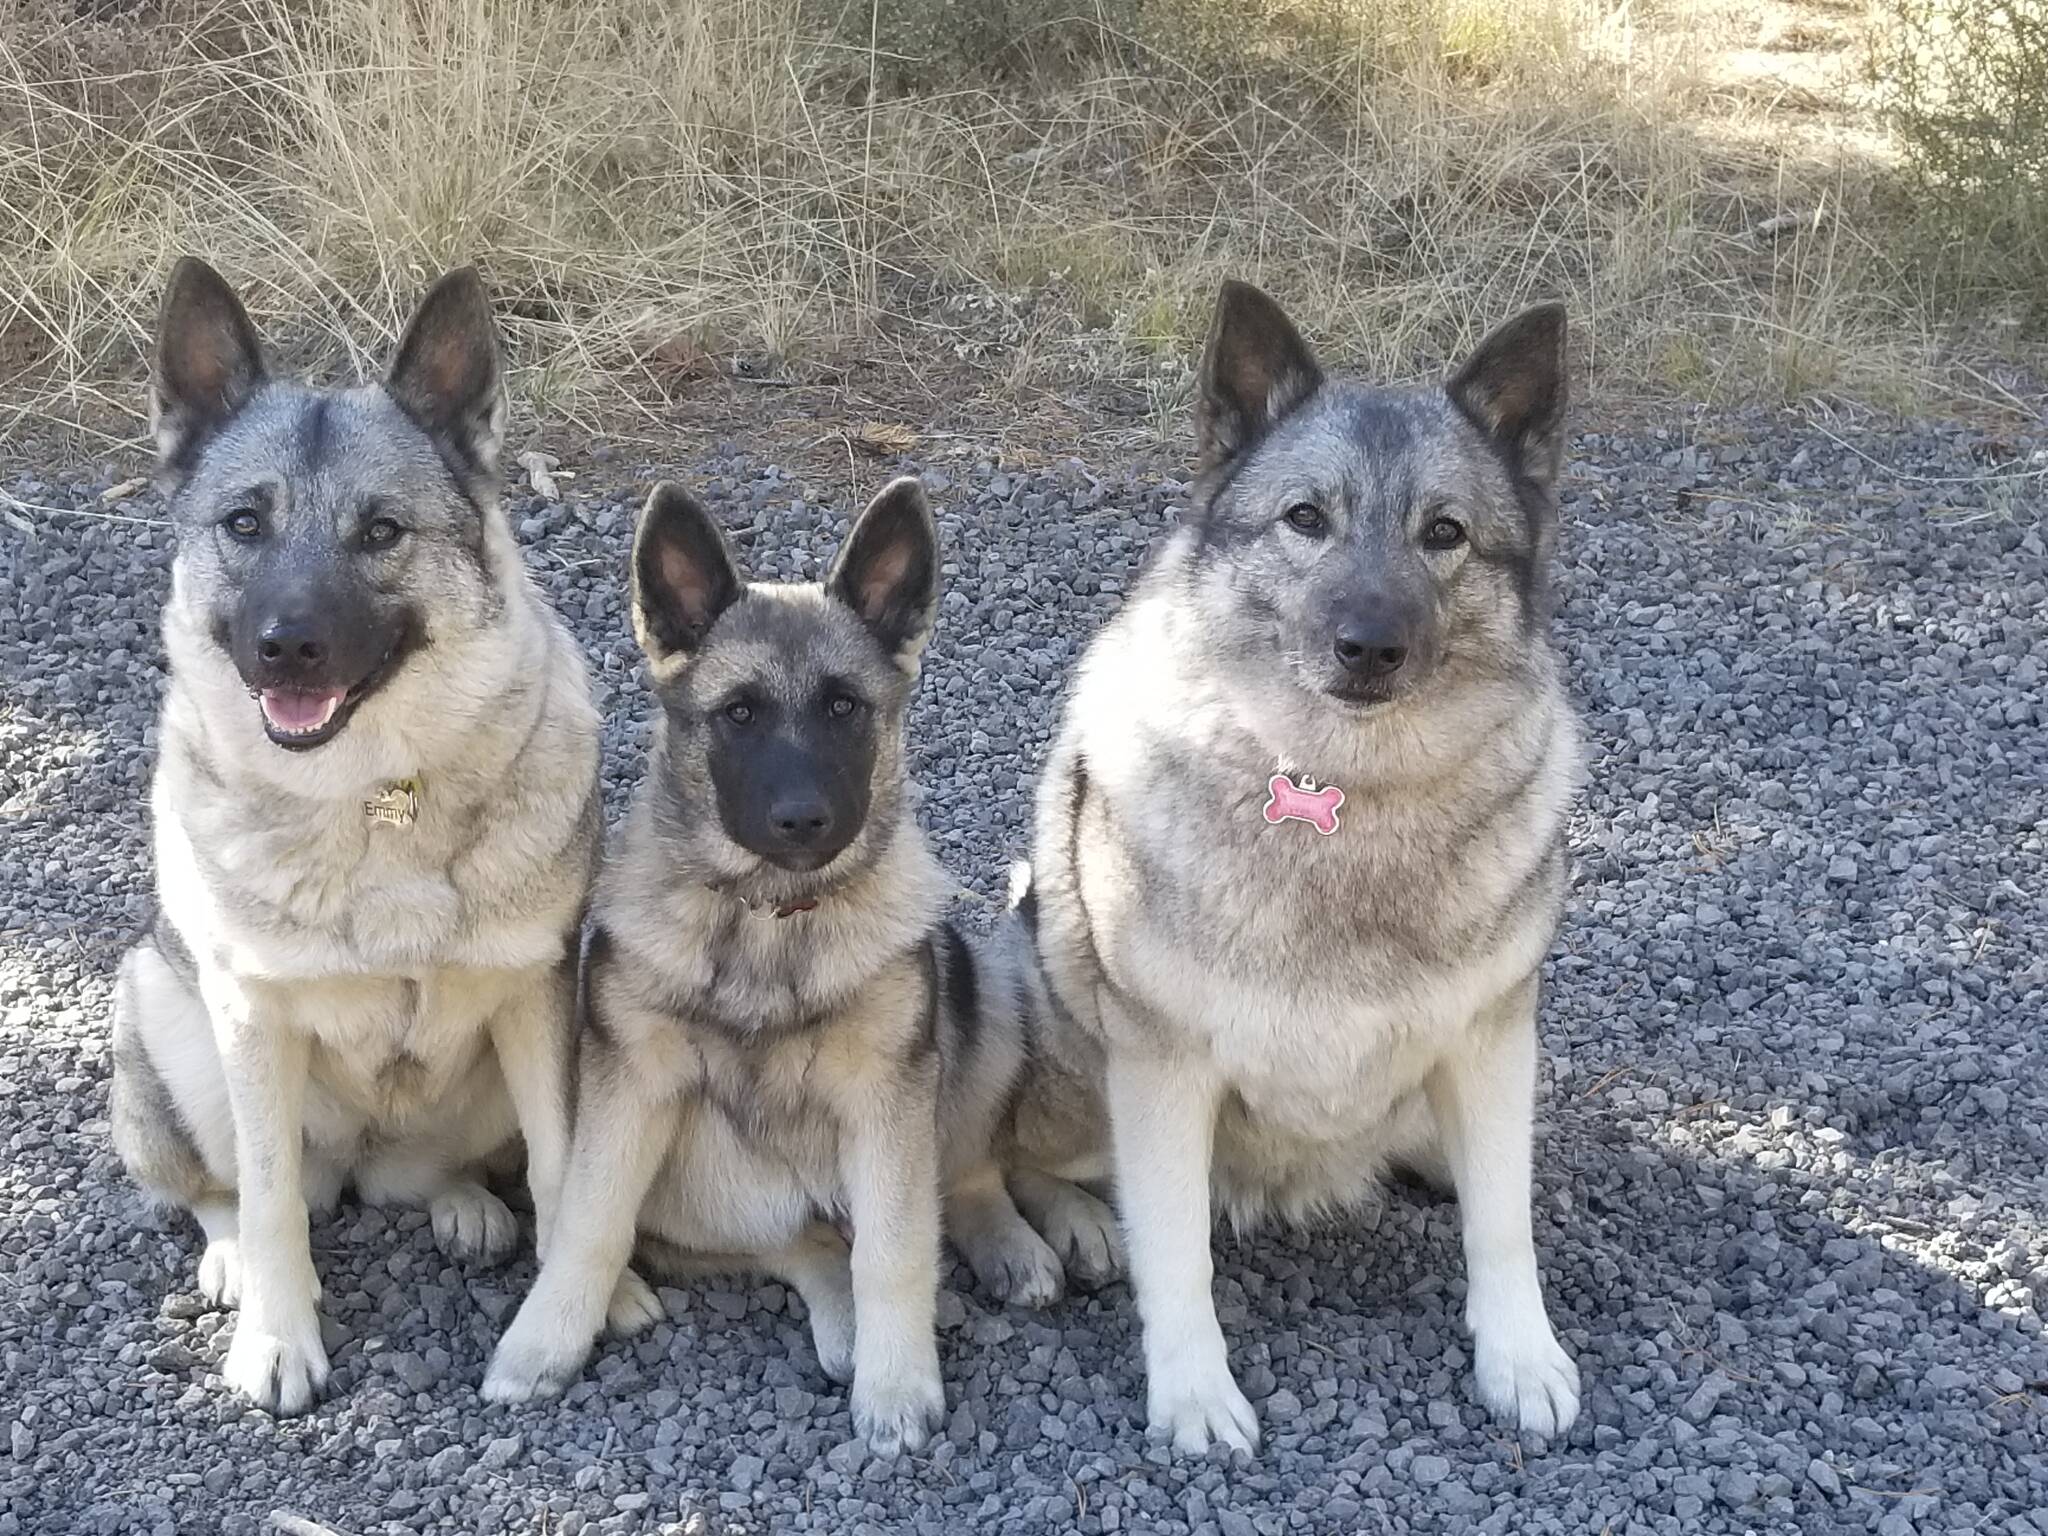 Photo provided
Norwegian elkhounds will be among the guests of honor at the Nordic Folk Fest, which takes place Oct. 7 at the Whidbey Island Nordic Lodge.